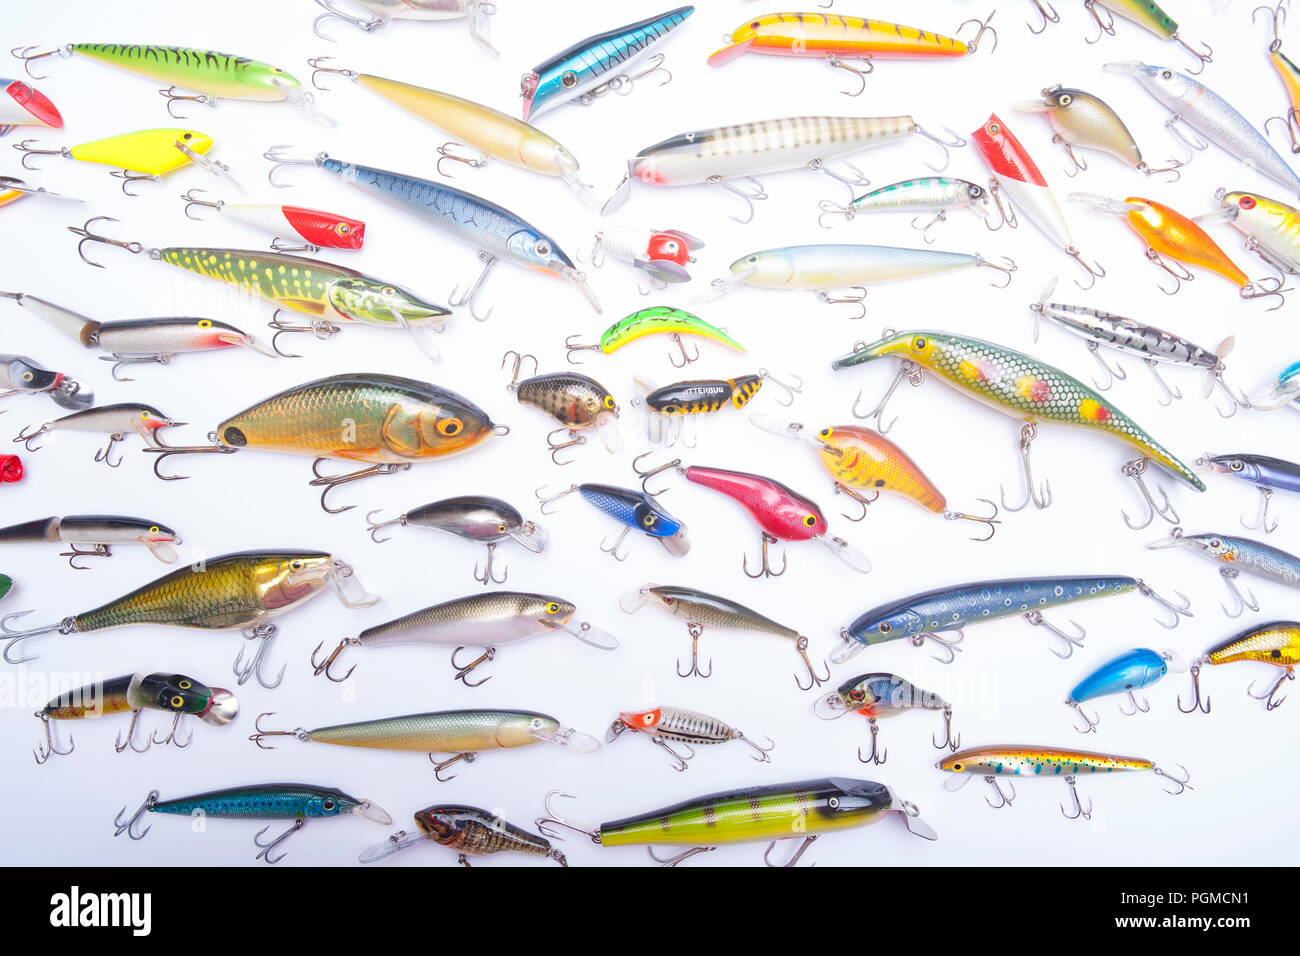 A selection of mostly modern fishing lures, also known as plugs, equipped with treble hooks and designed for catching predatory fish. Fishing plugs ar Stock Photo